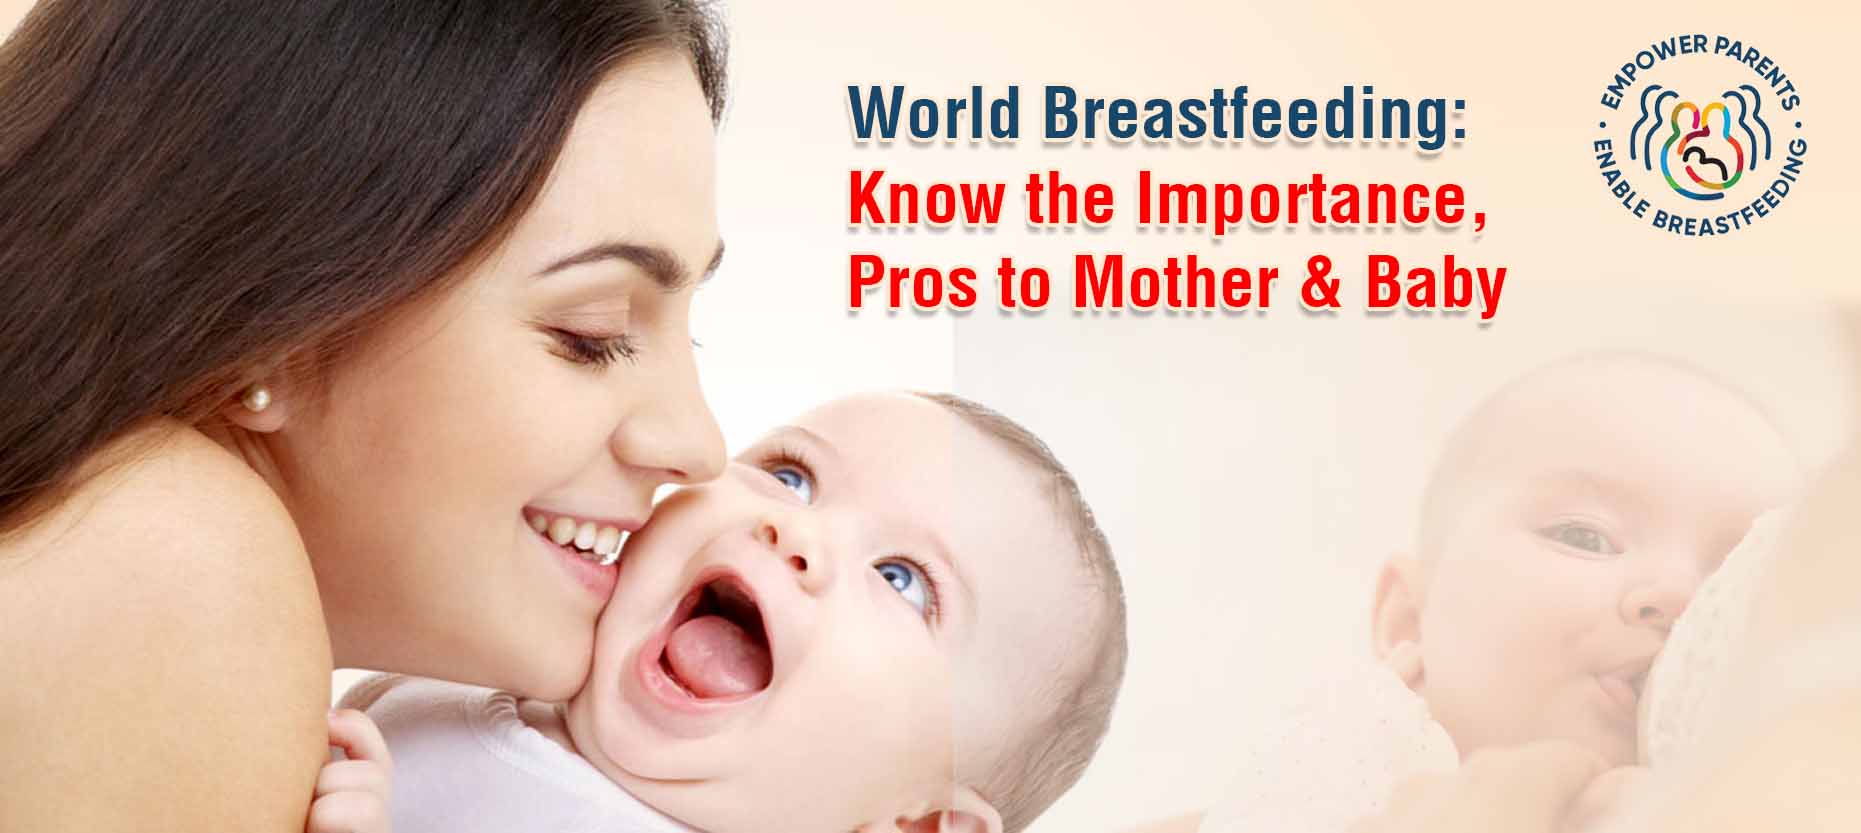 Breastfeeding: Know the Importance, Pros to Mother & Baby